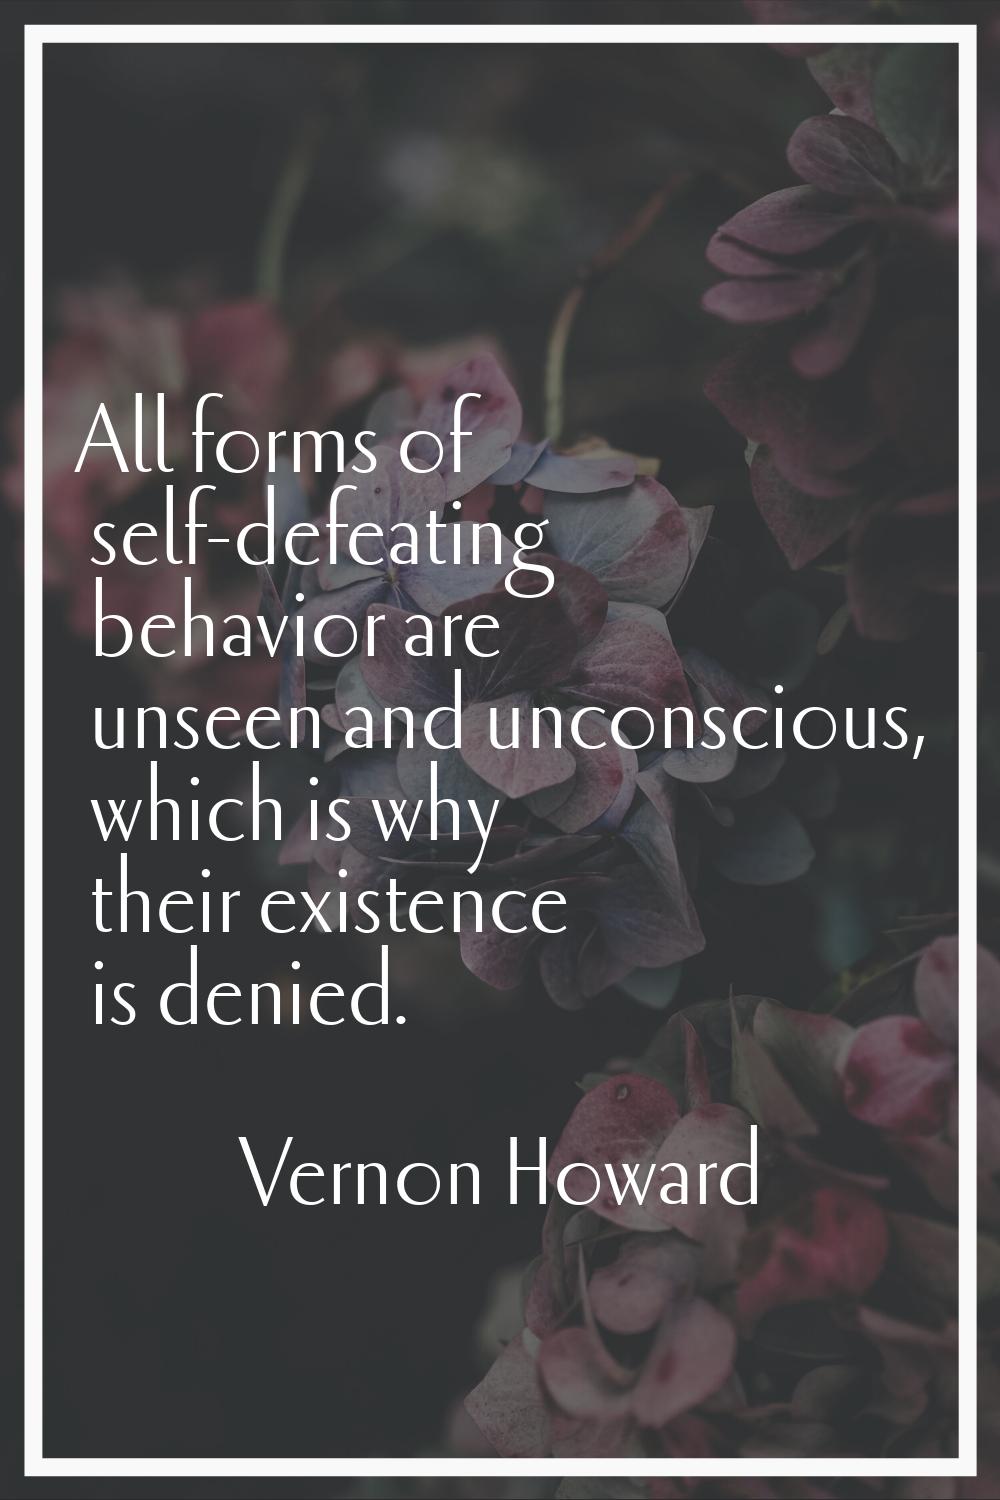 All forms of self-defeating behavior are unseen and unconscious, which is why their existence is de